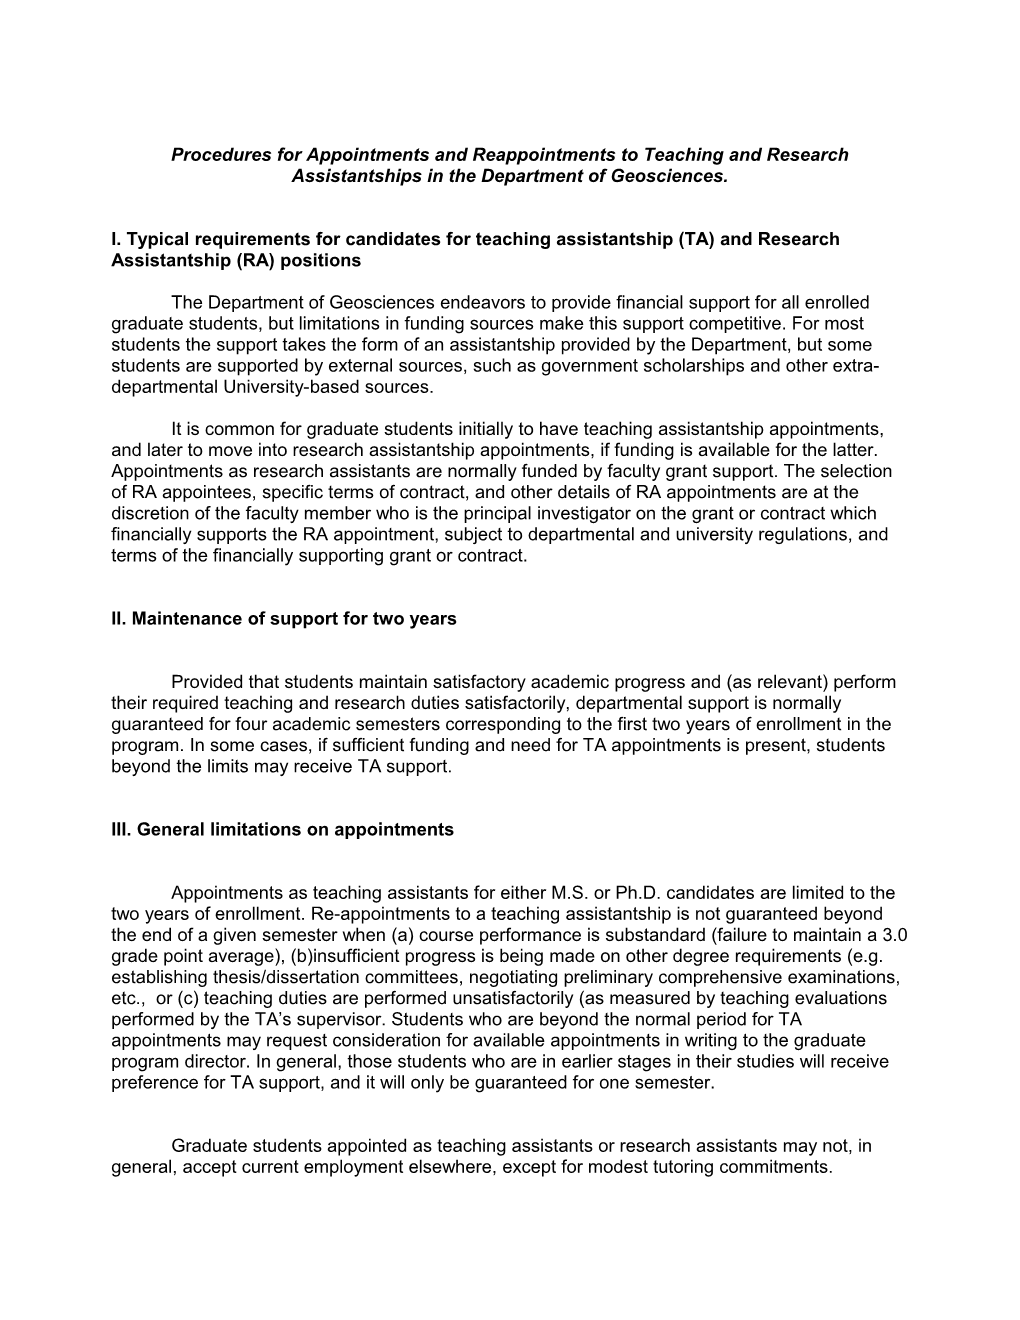 Procedures for Appointments and Reappointments to Teaching and Research